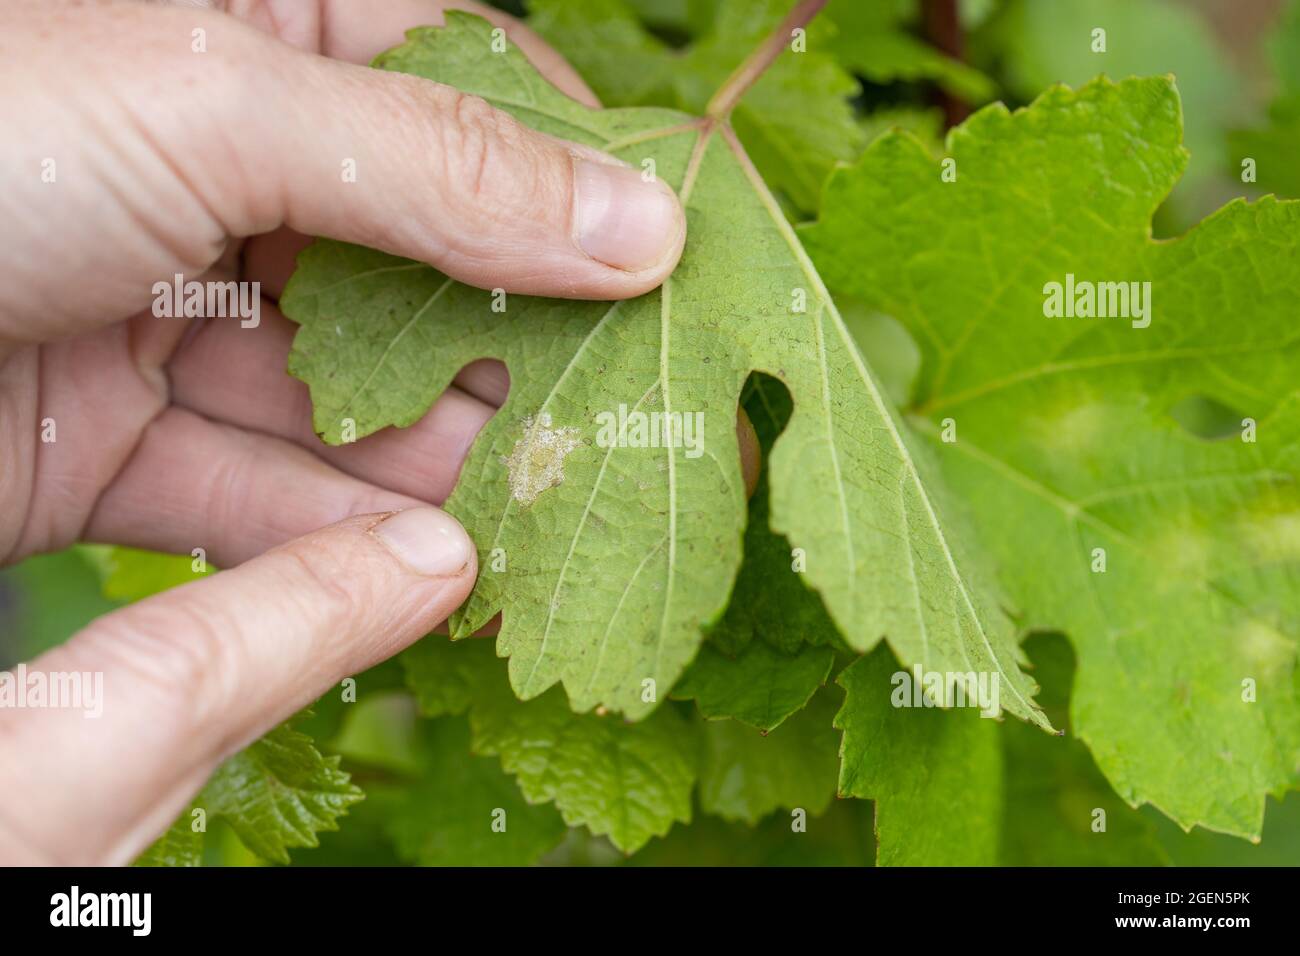 Randersacker, Germany. 19th Aug, 2021. Beate Leopold, managing director of Weinbauring Franken, shows the infestation of fungal spores of the so-called downy mildew (peronospora) on the leaf of a vine. The fungal disease is threatening the grapes in some vineyards in Franconia. After the many rains in spring and summer, the fungus is a widespread problem throughout Germany, but also in other European countries. Credit: Daniel Karmann/dpa/Alamy Live News Stock Photo